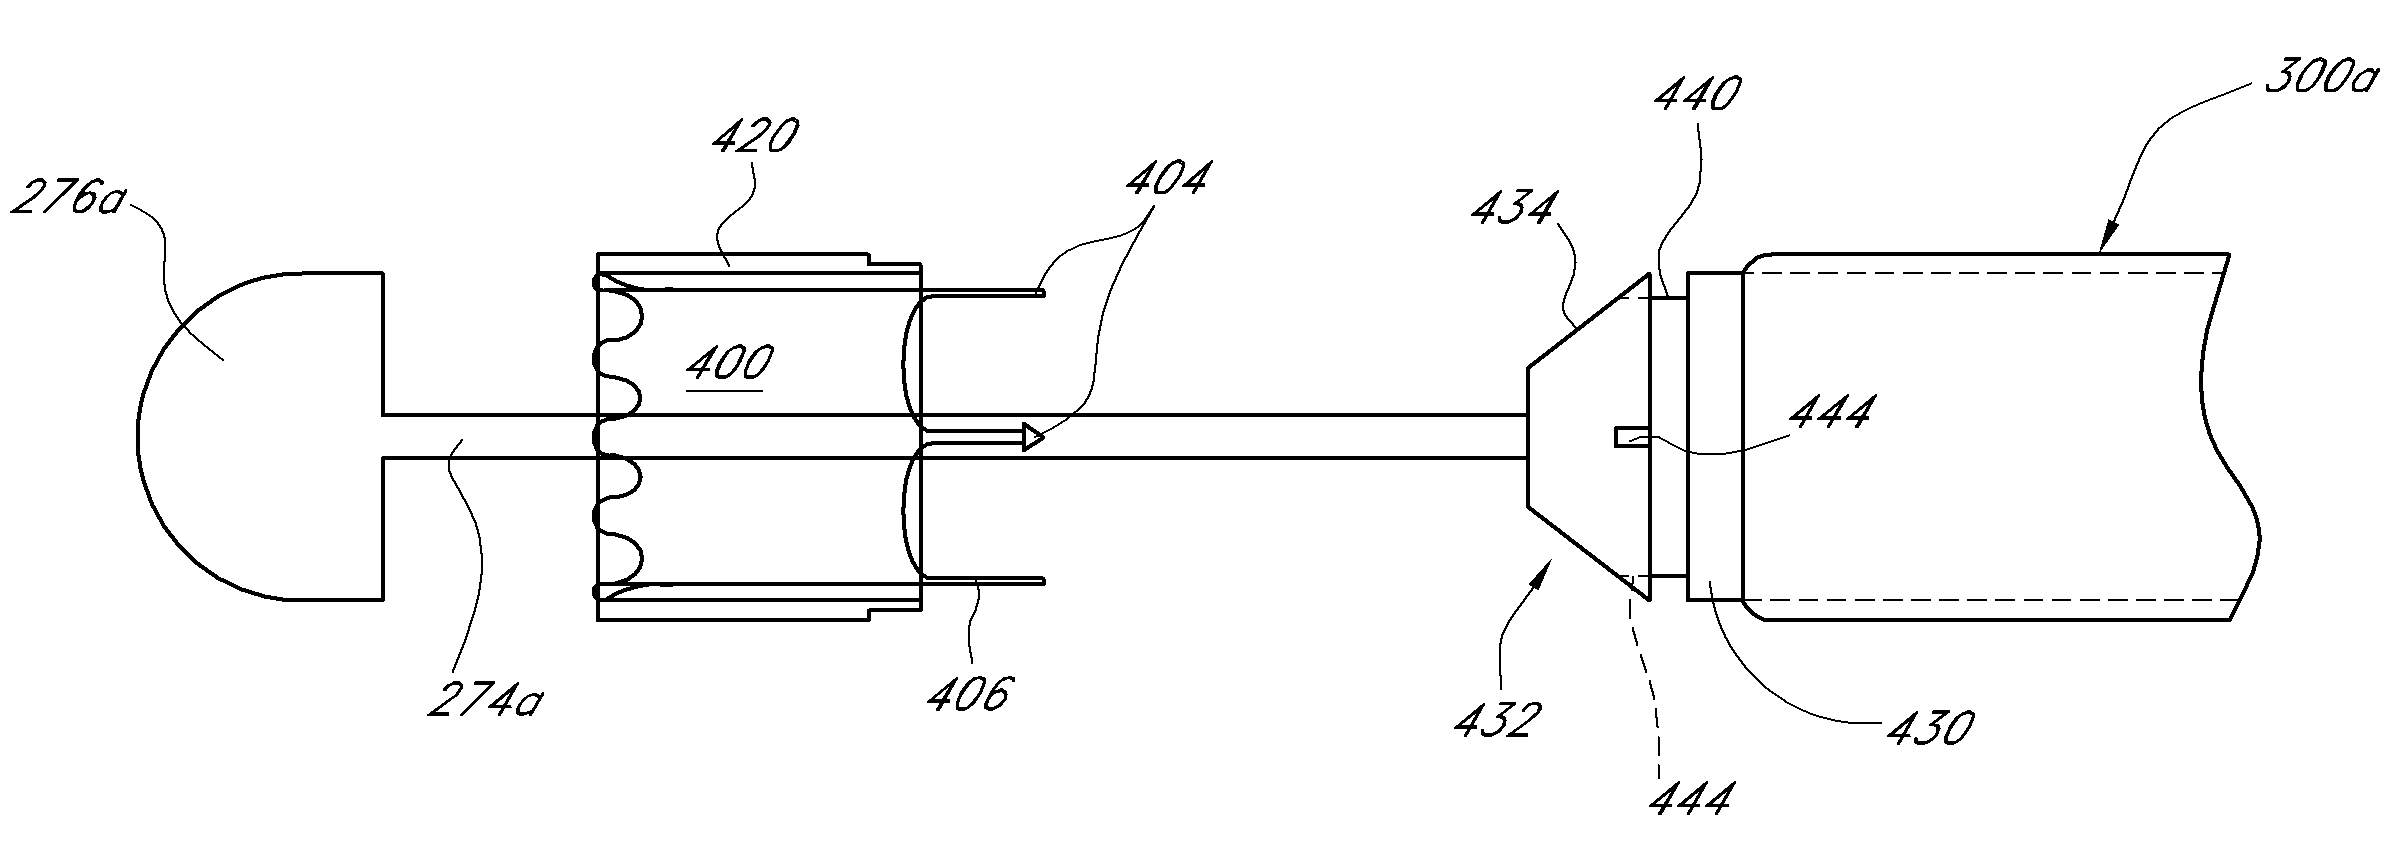 Vascular implant and delivery system